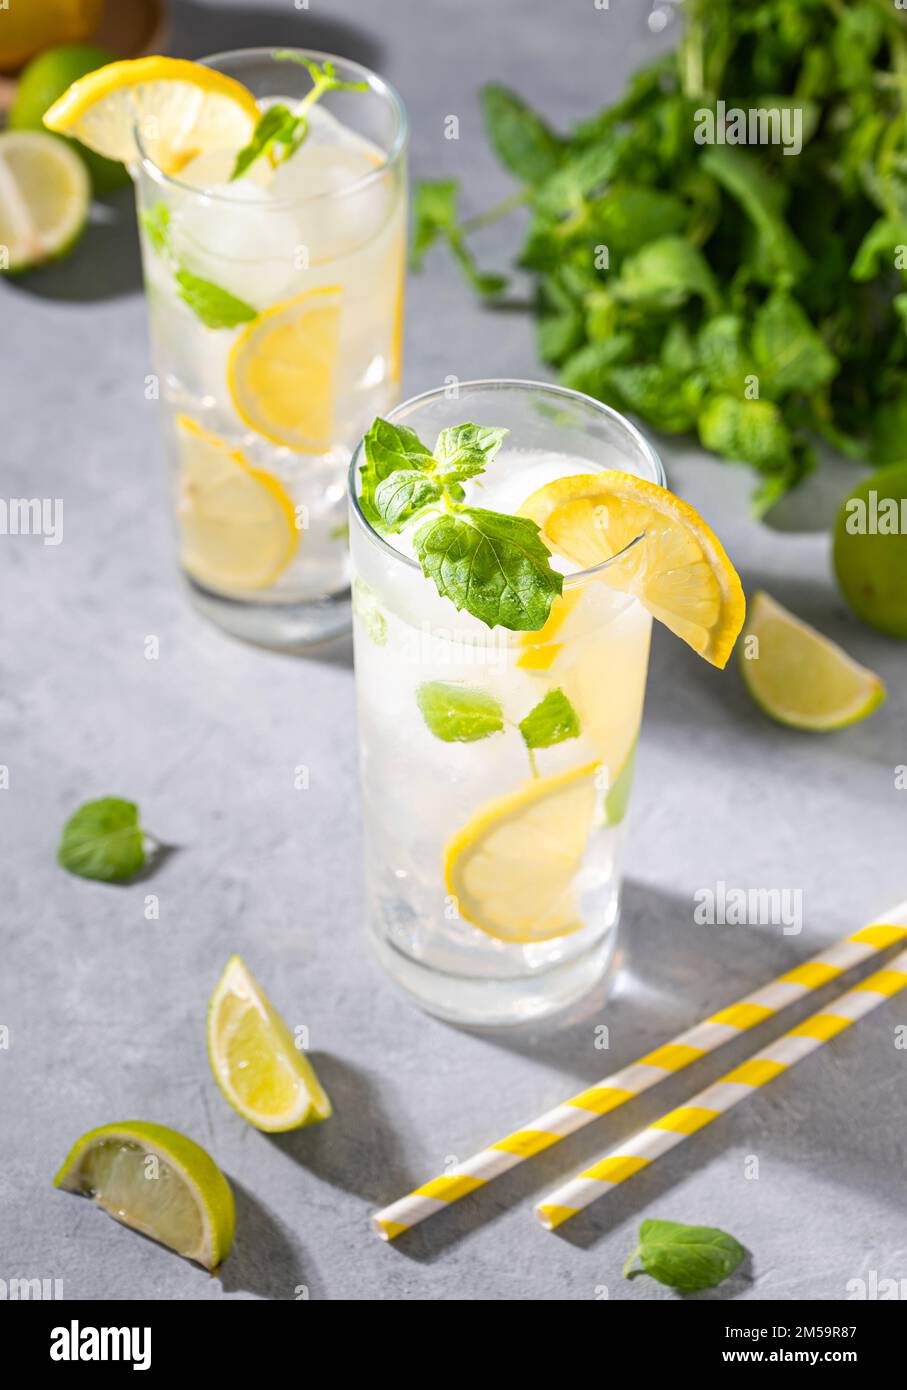 Mojito drink with fresh lemons. Refreshing cocktail with lime, lemon, mint and ice on gray background. Summer cold drinks concept. Stock Photo